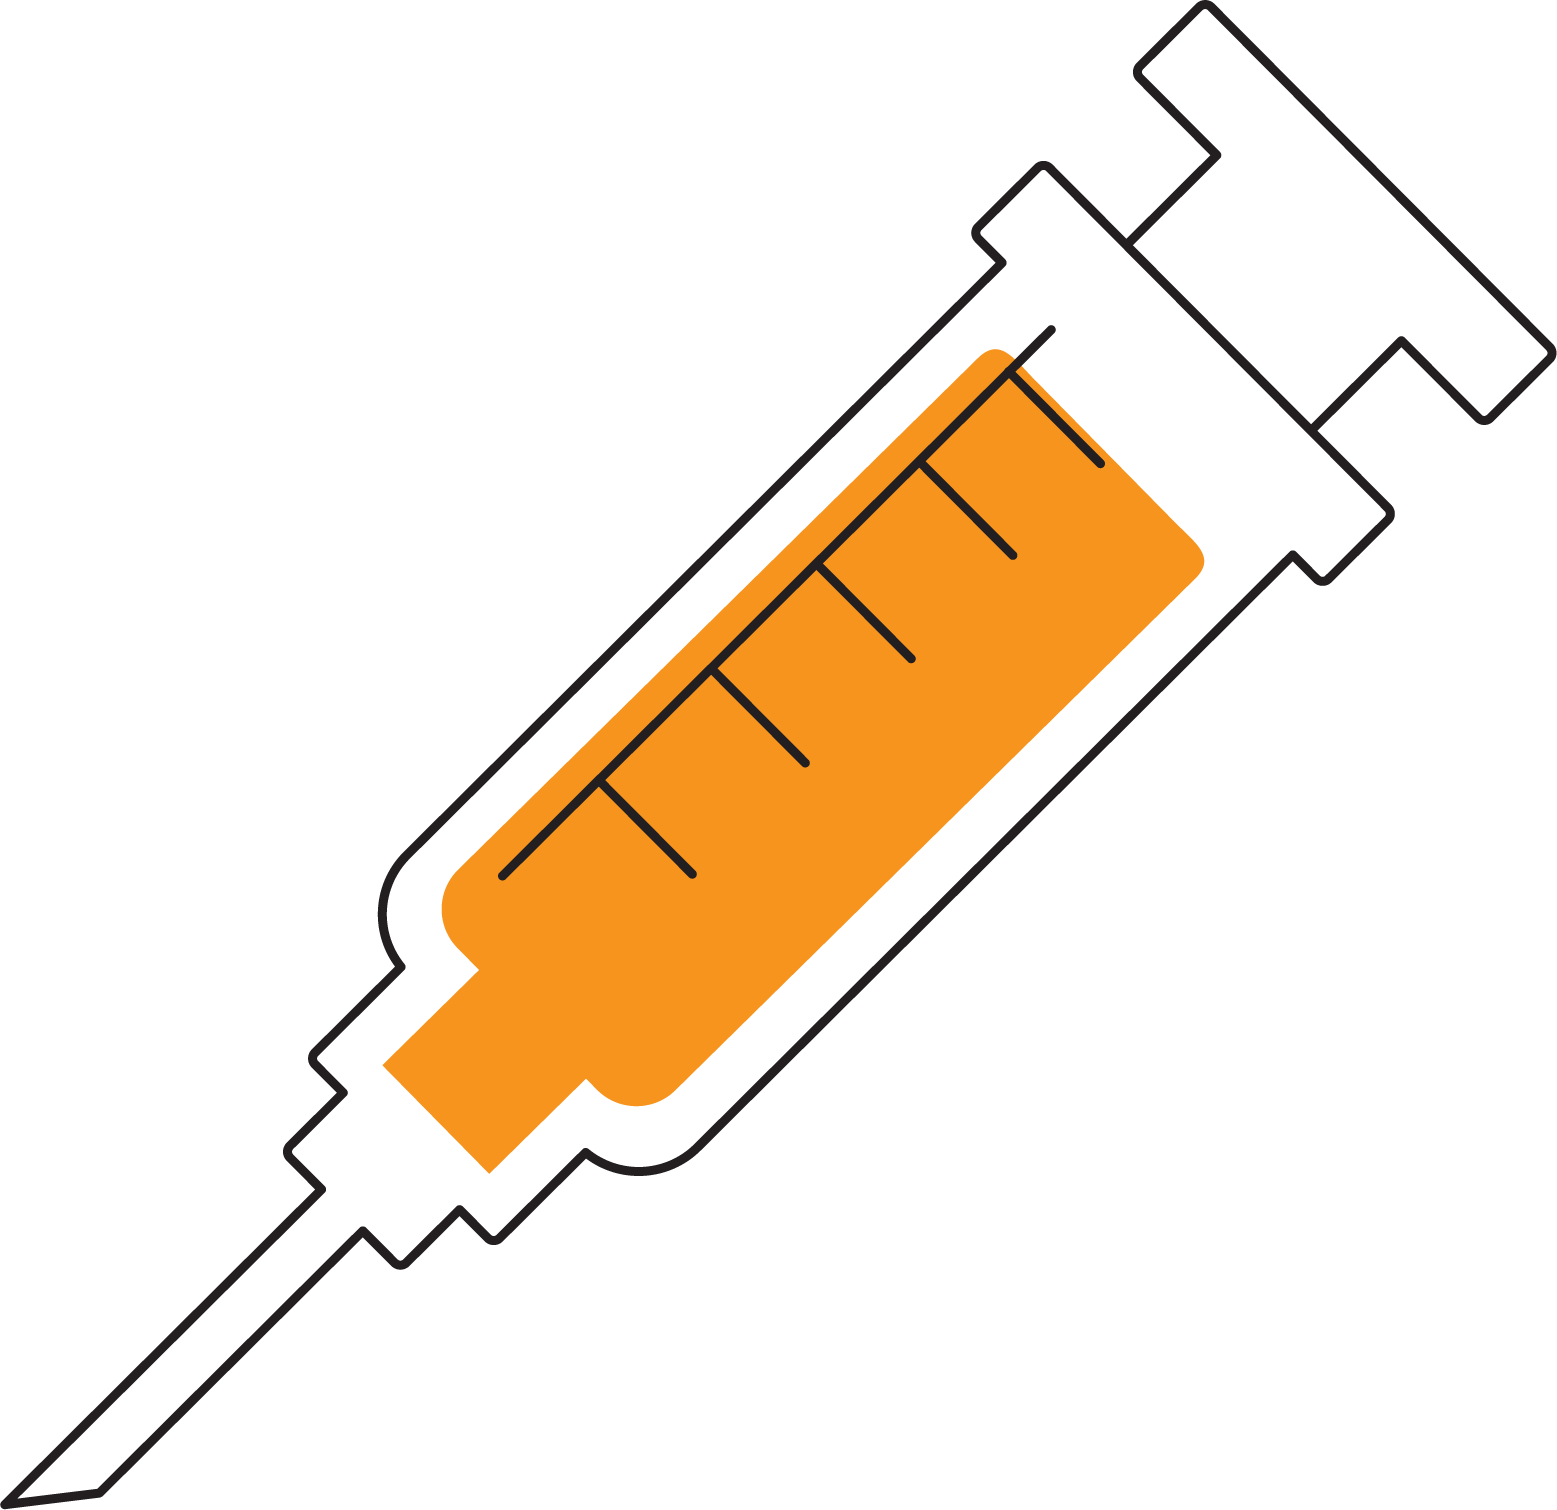 Syringe clipart parallel. Injection hypodermic needle clip